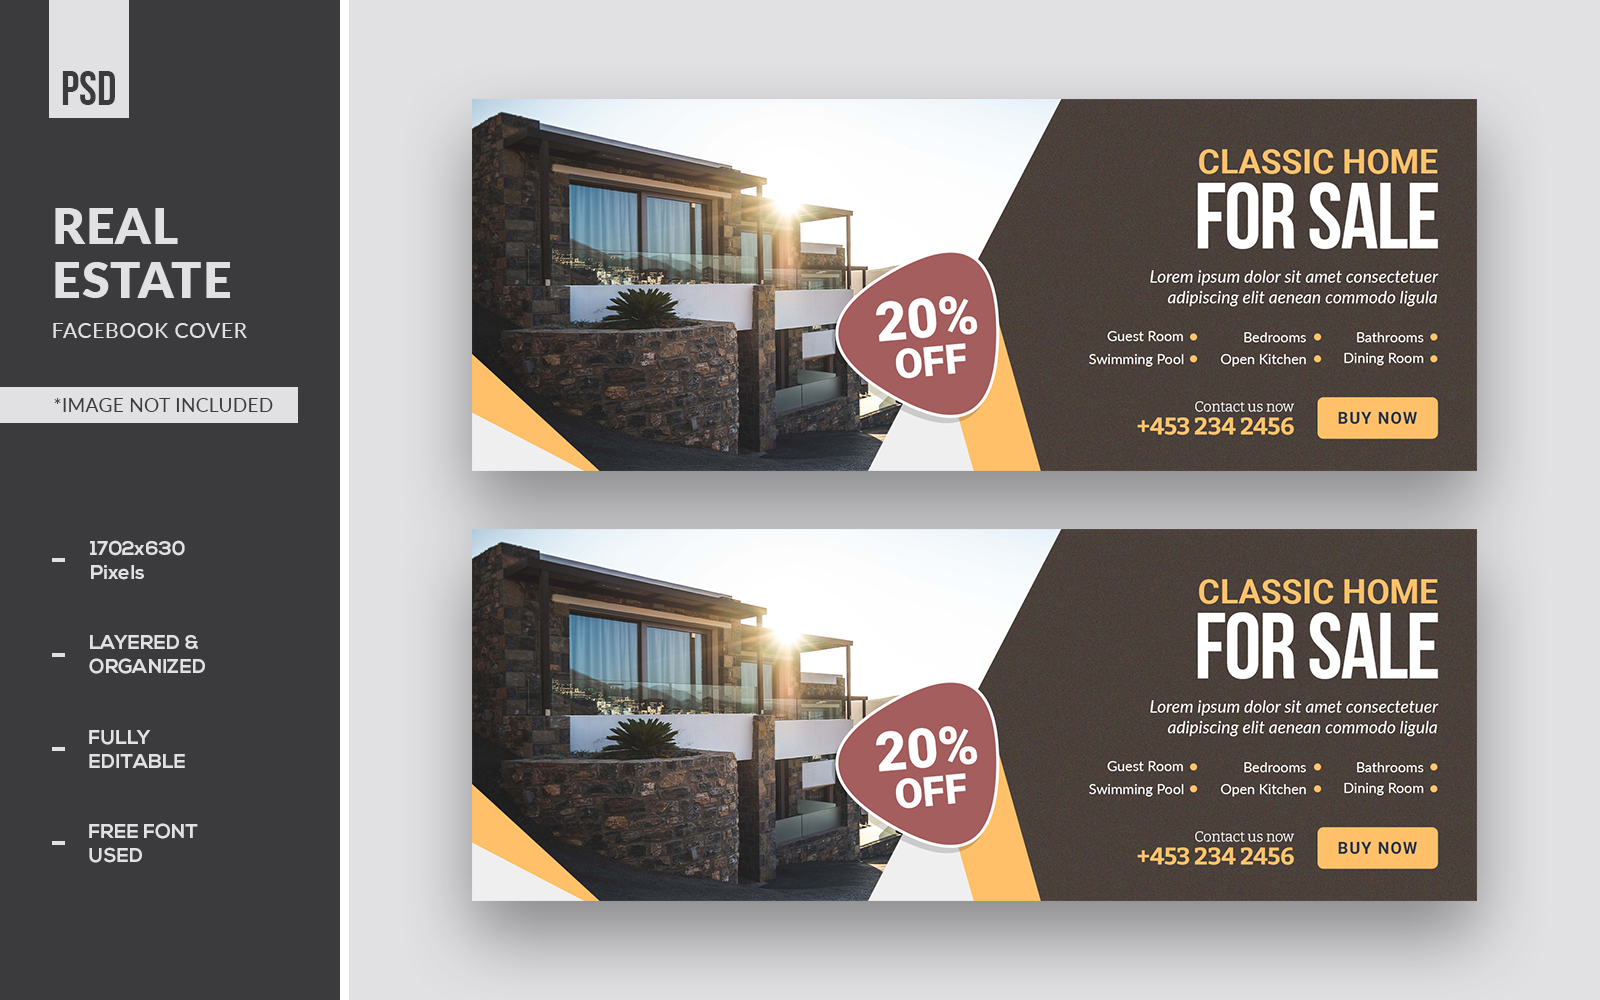 Classic Real Estate Design Facebook Cover And Social Media Banner Ads